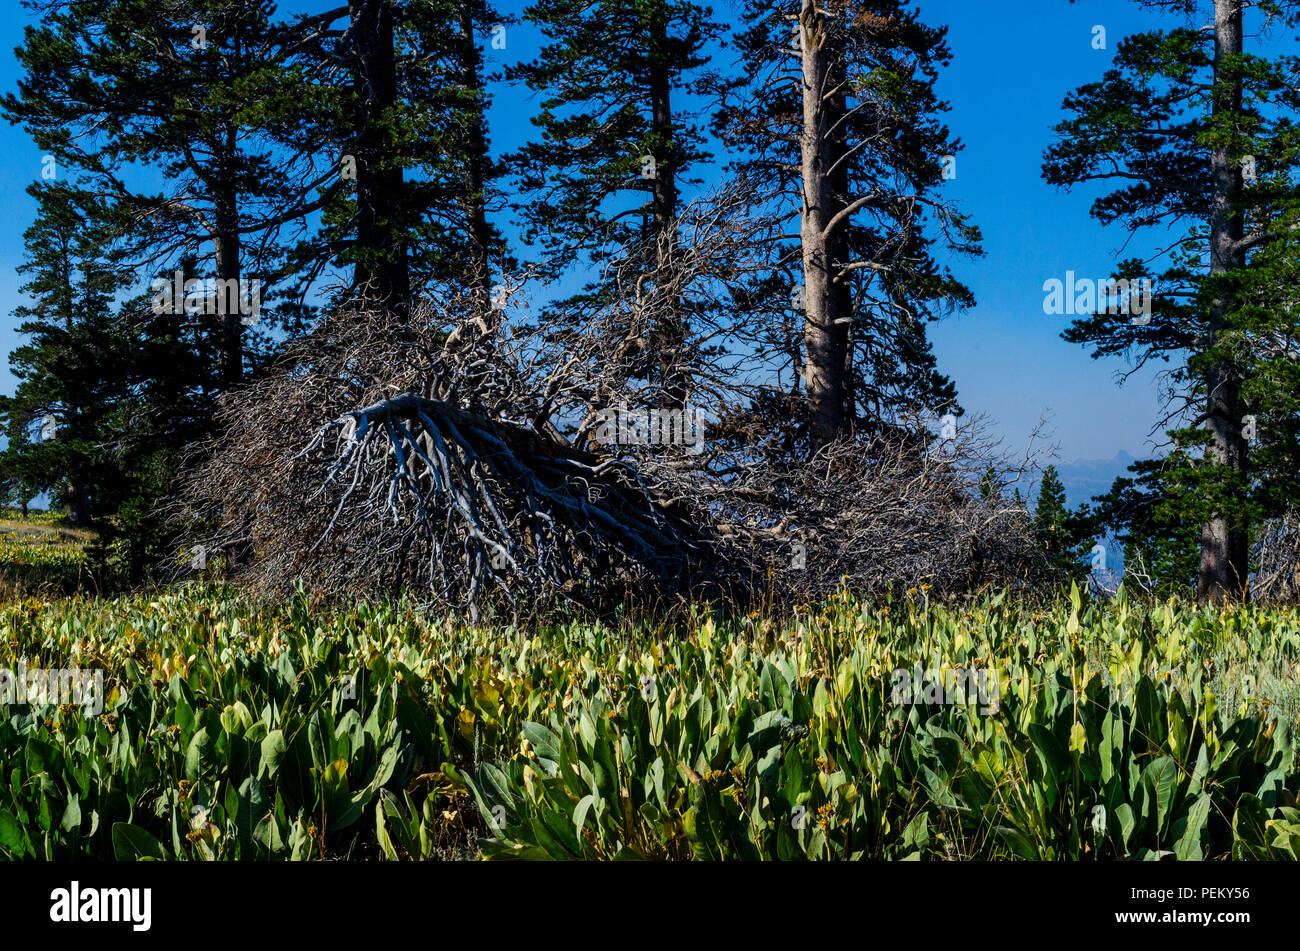 A fallen dead tree and Mules Ears (Wyethia mollis) in the Stanislaus National Forest Sierra Nevada Mountains California USA Stock Photo